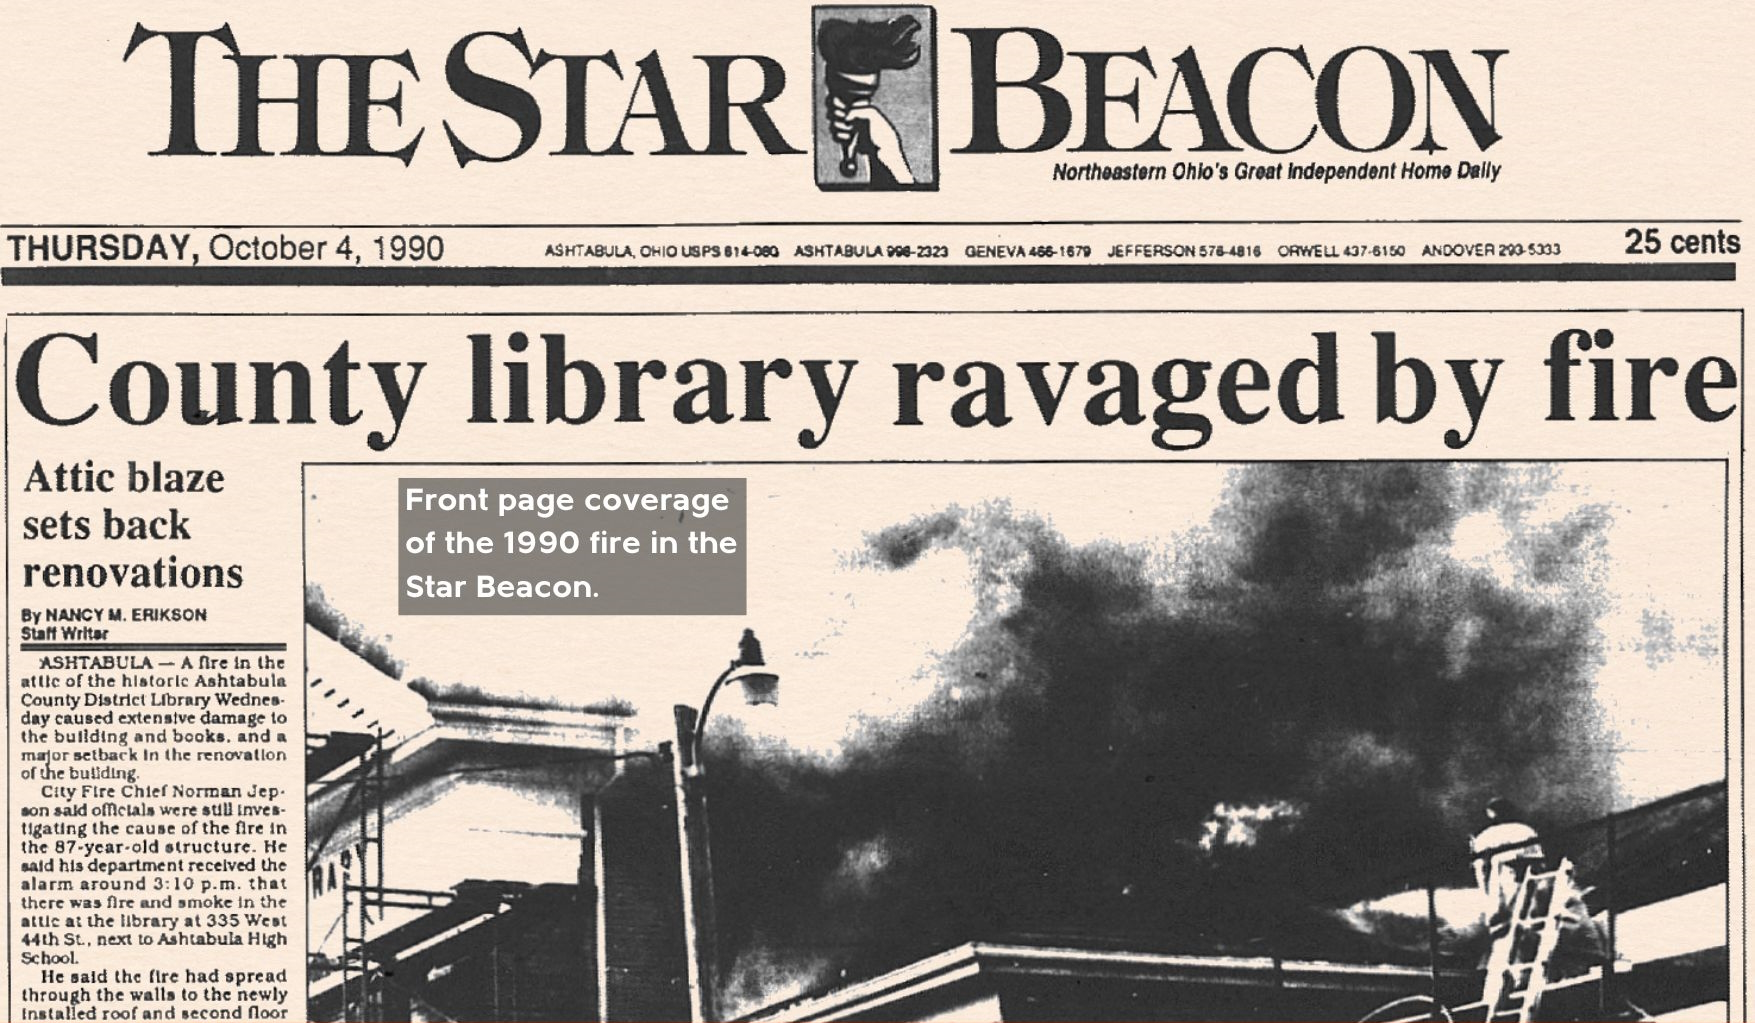 Front page coverage of the Ashtabula Library fire in the Star Beacon of October 4, 1990..